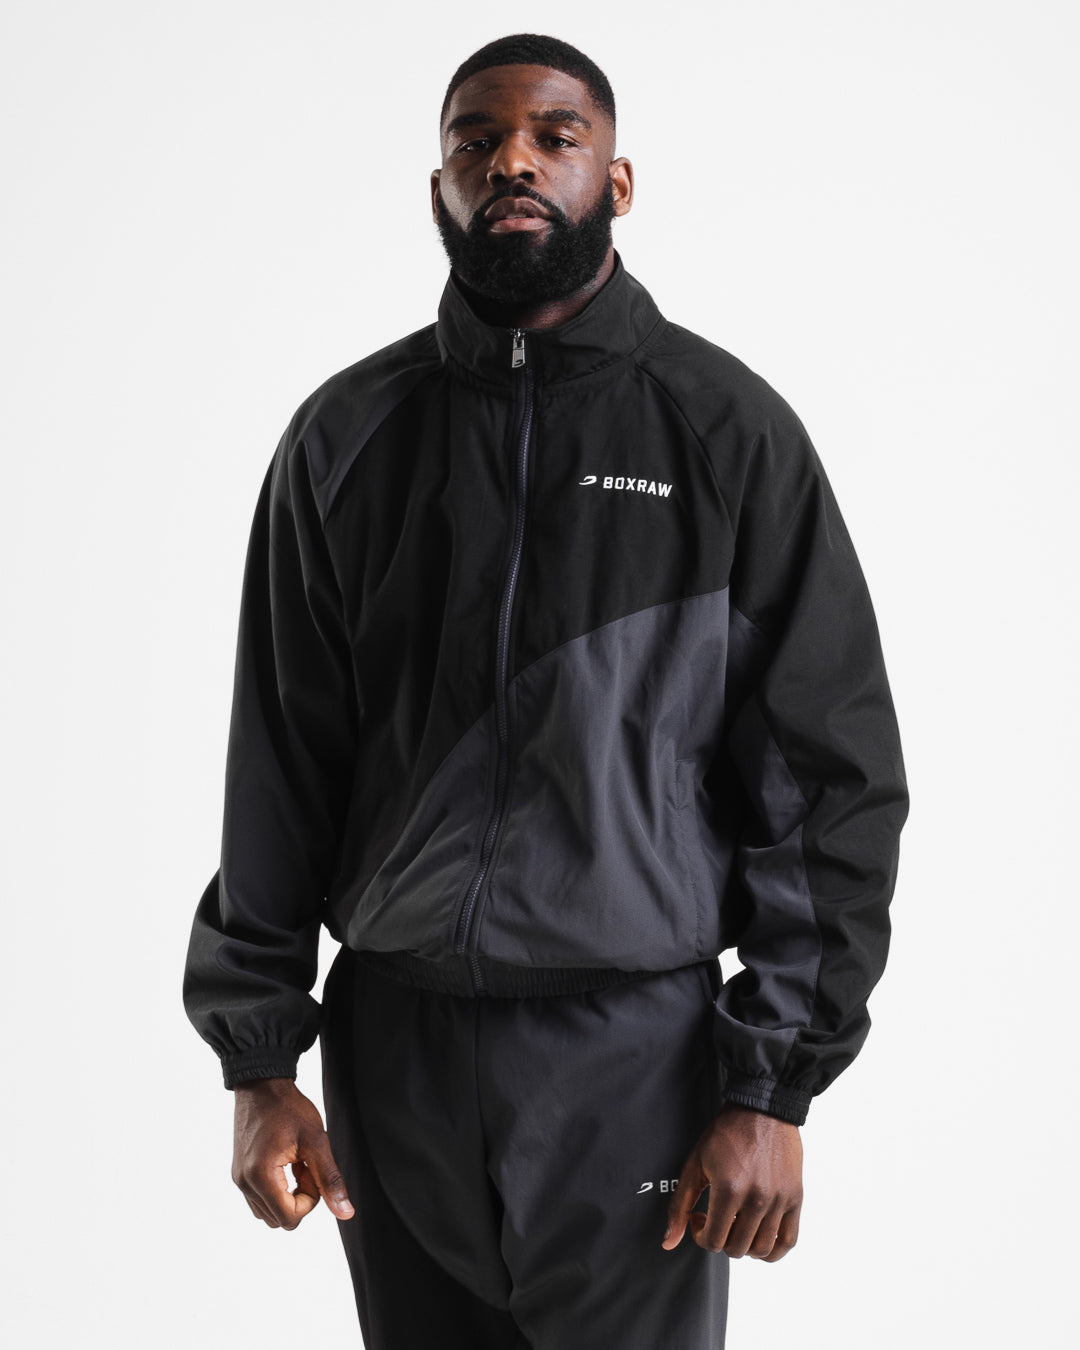 Williams Boxing Tracksuit Jacket - Black/Charcoal | BOXRAW